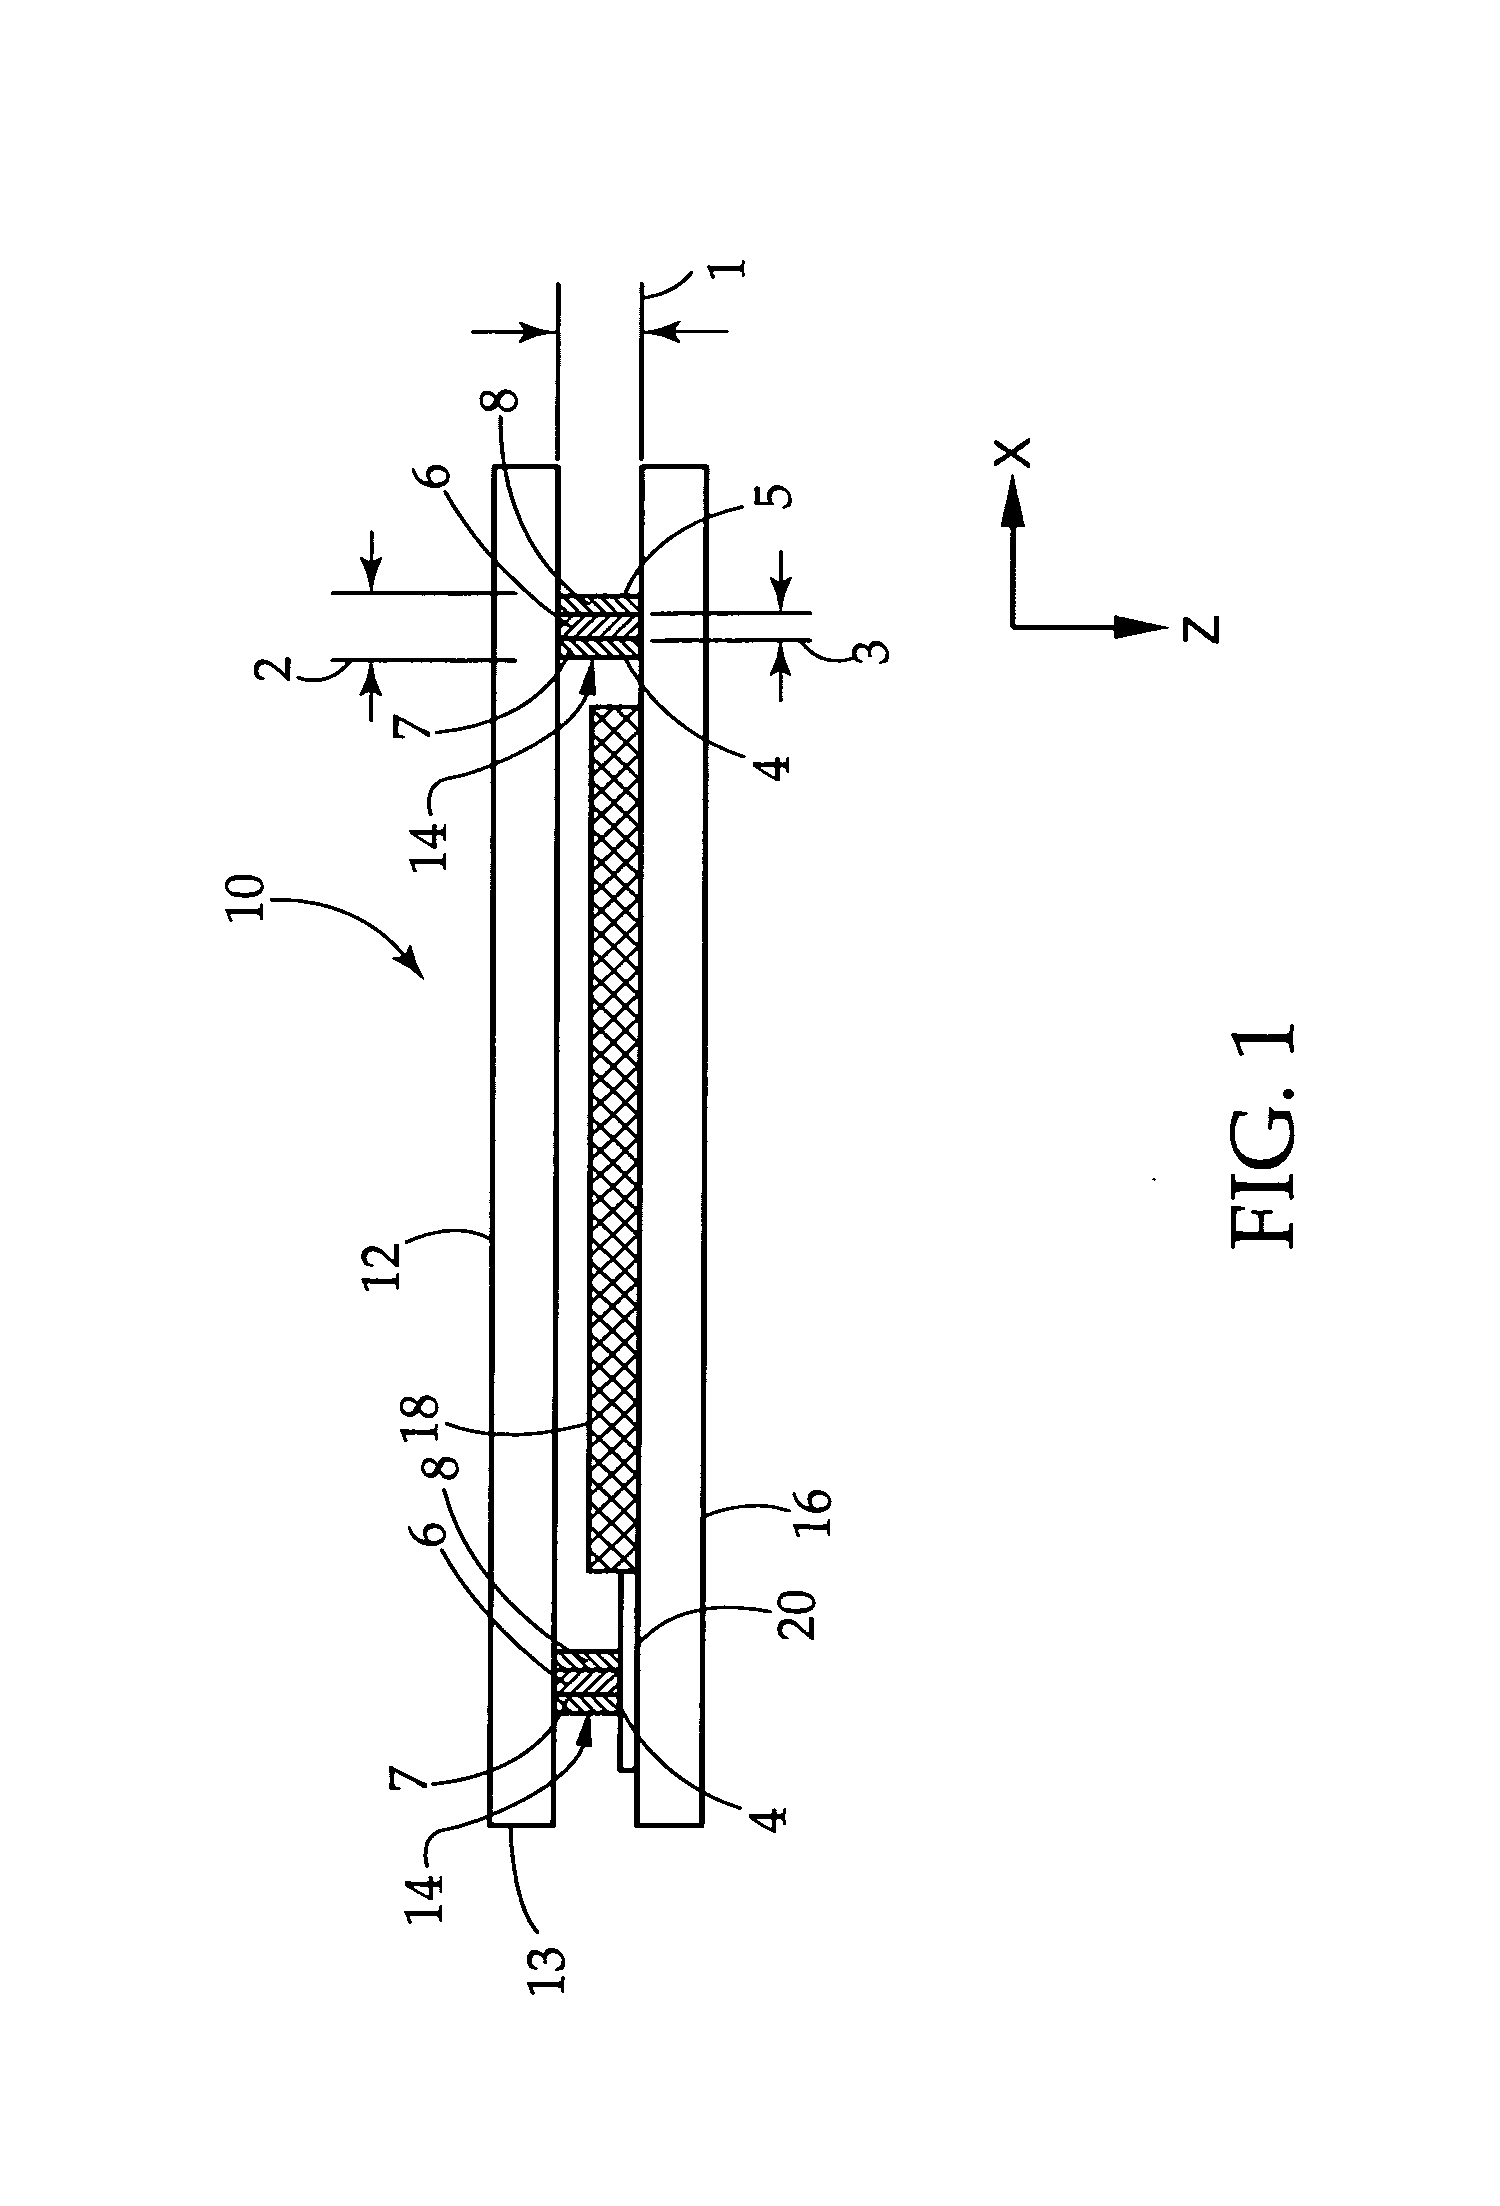 Glass packages and methods of controlling laser beam characteristics for sealing them